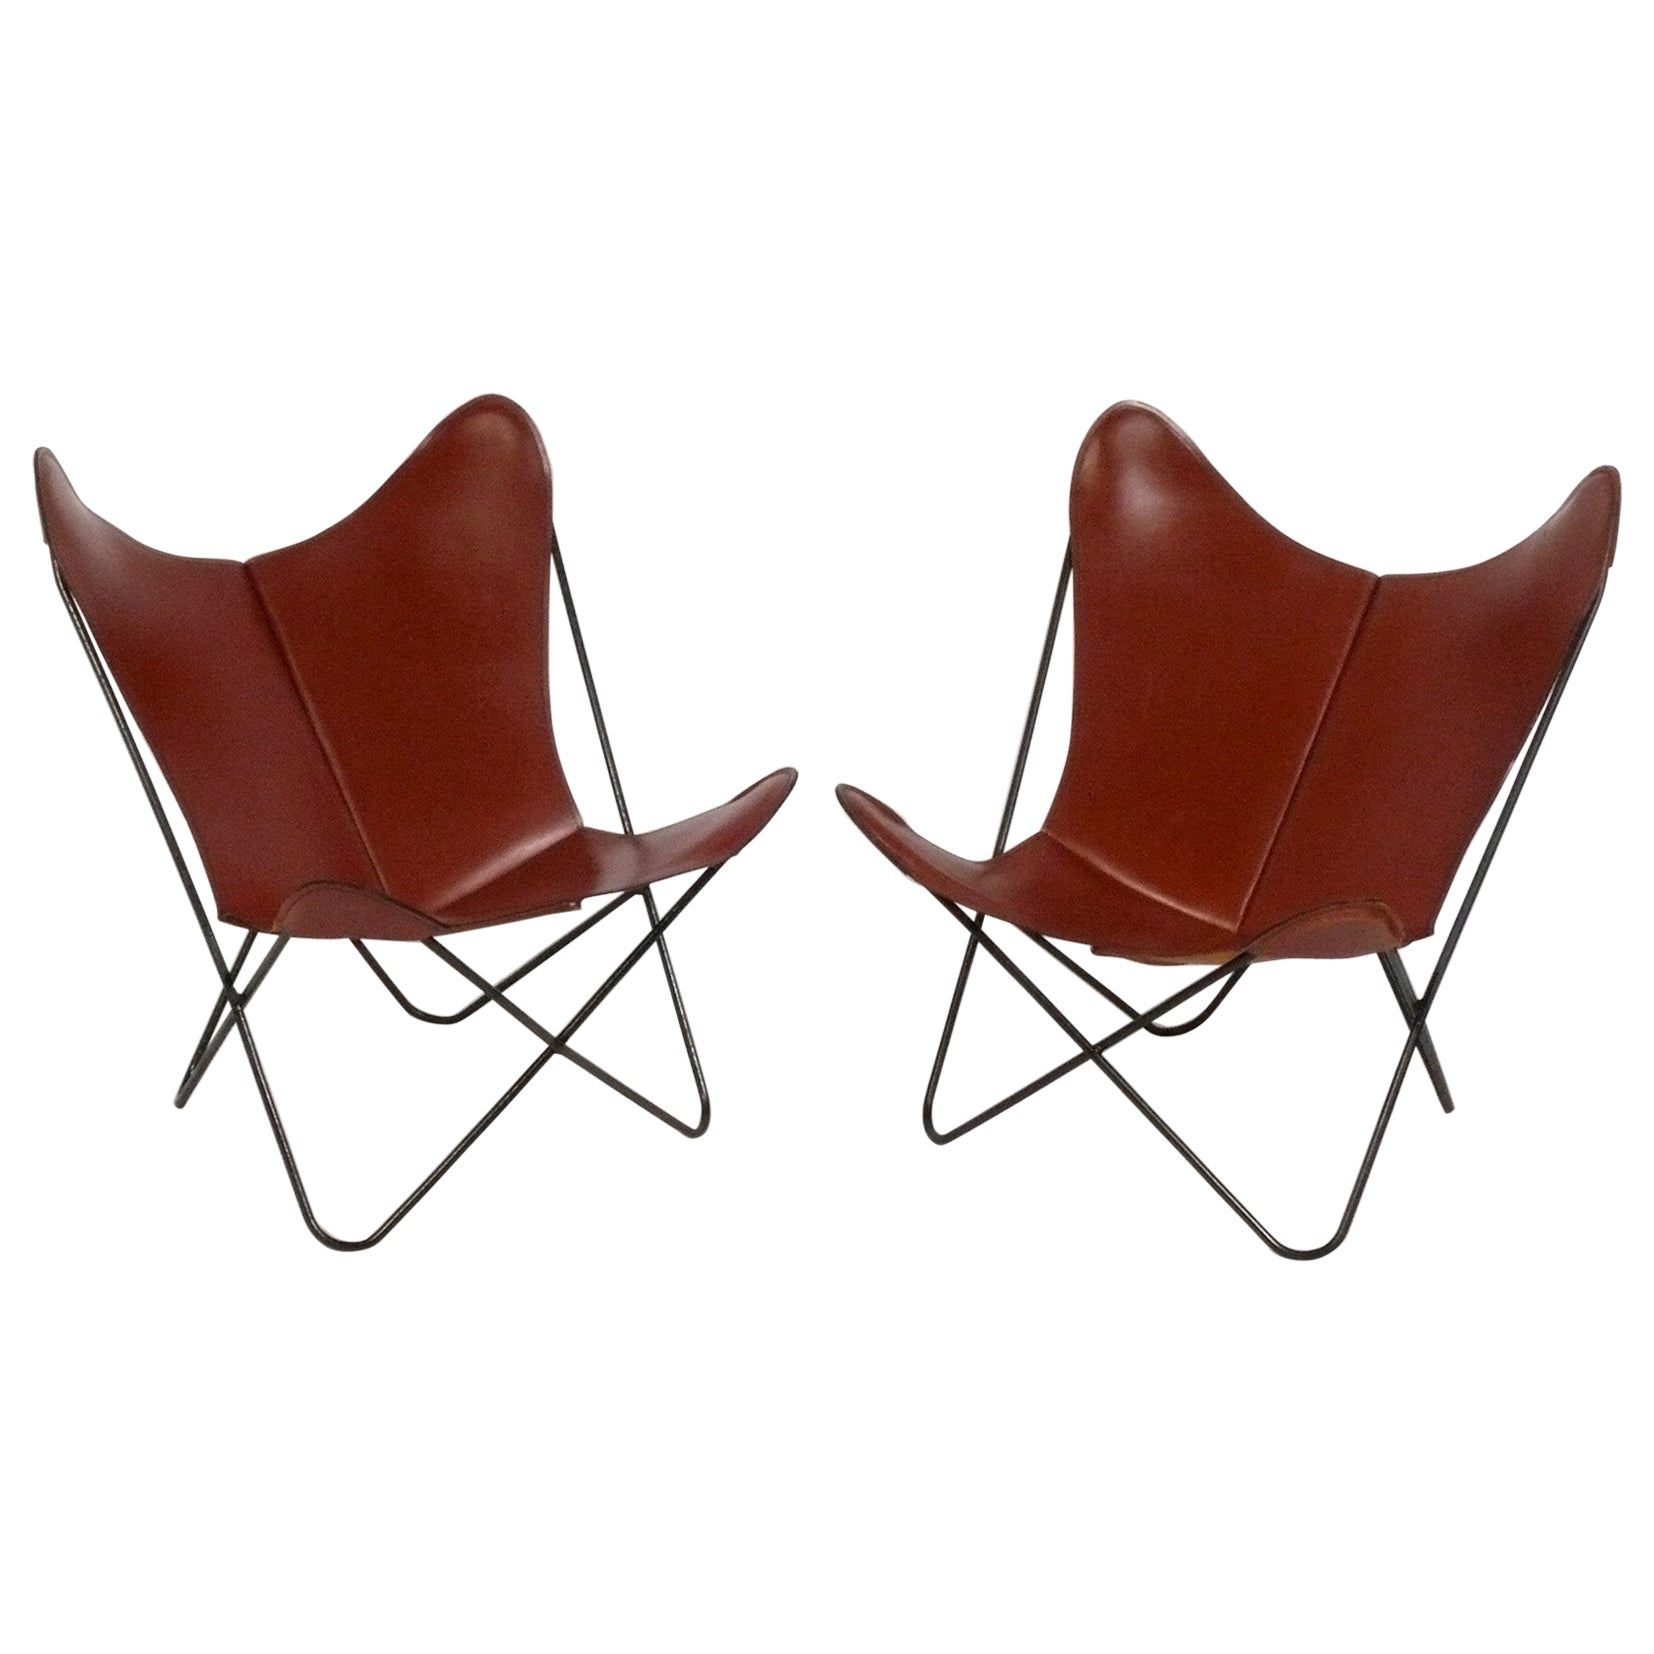 Sculptural Butterfly Lounge Chairs by Jorge Ferrari Hardoy in Cognac Leather